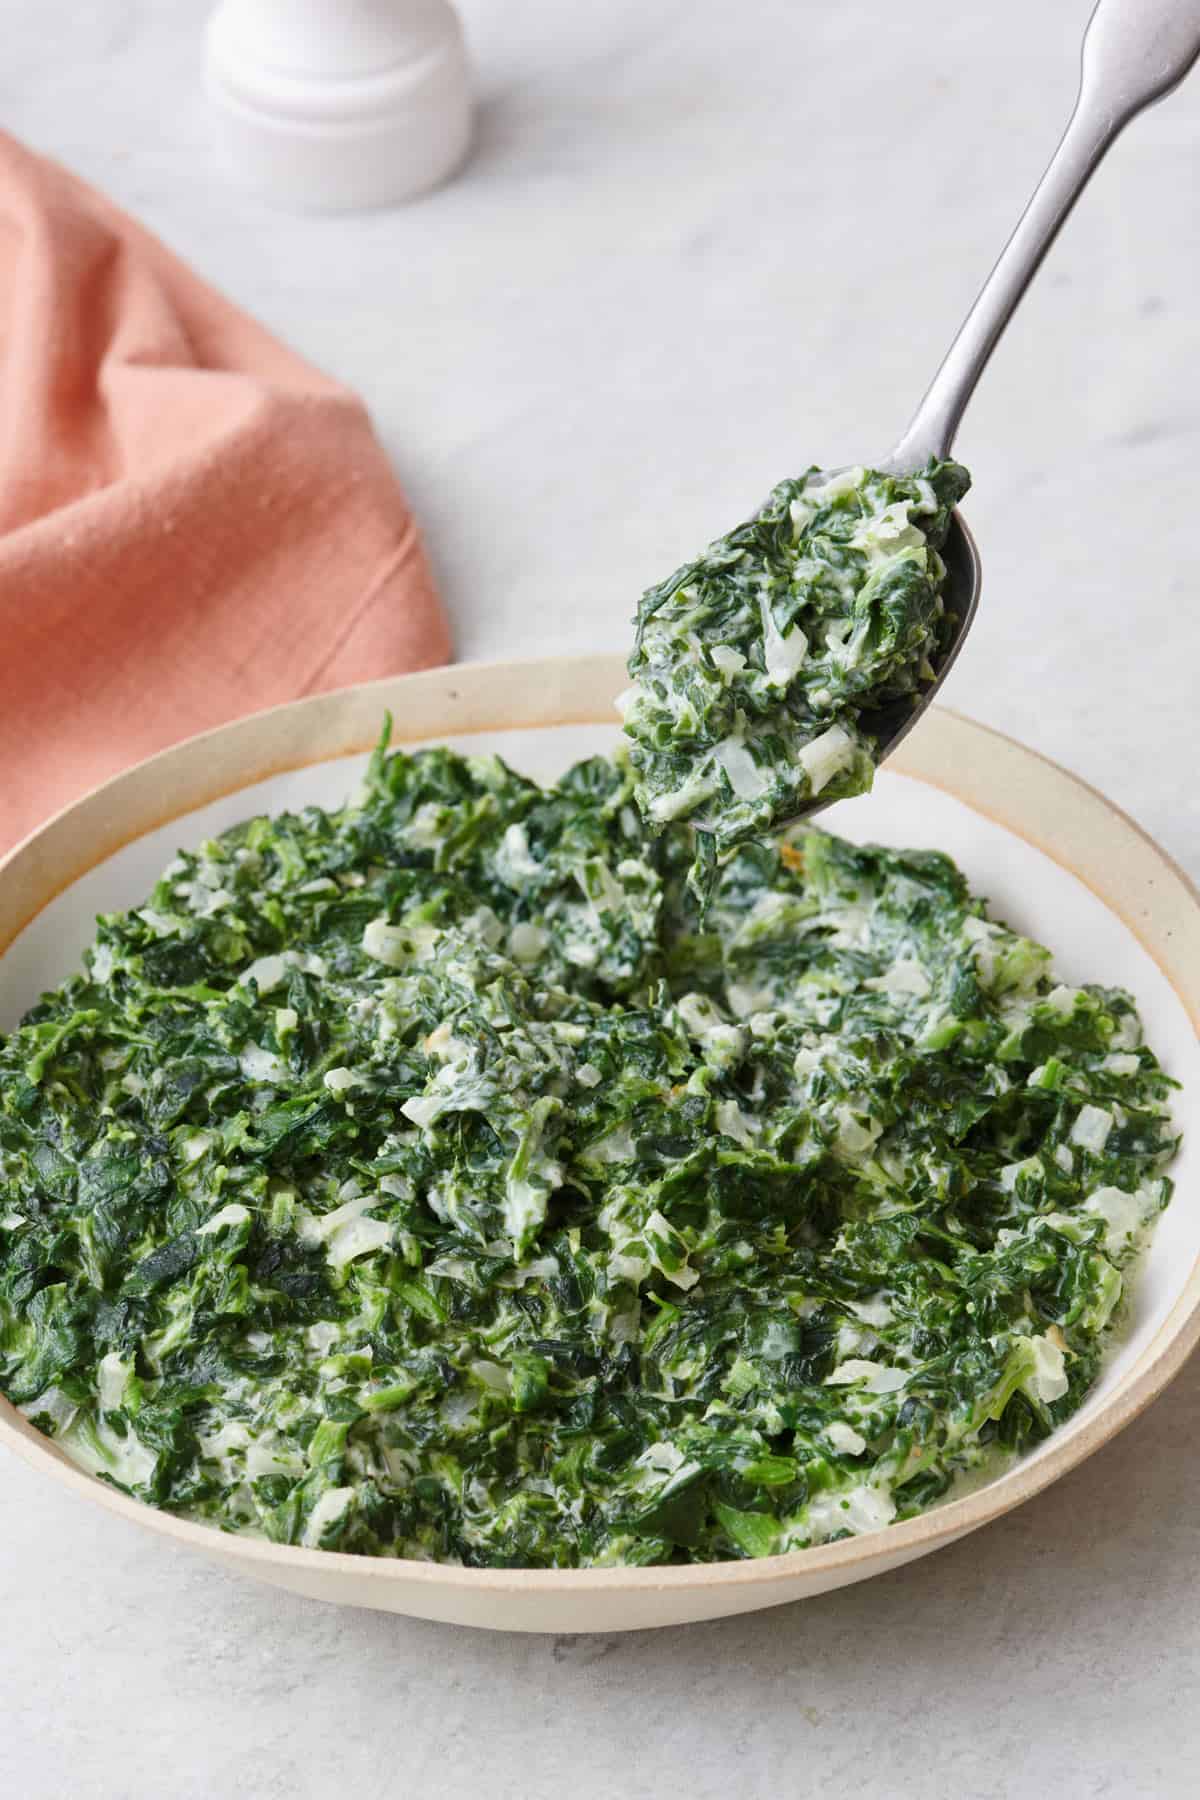 Spoon lifting up a serving of creamed spinach.